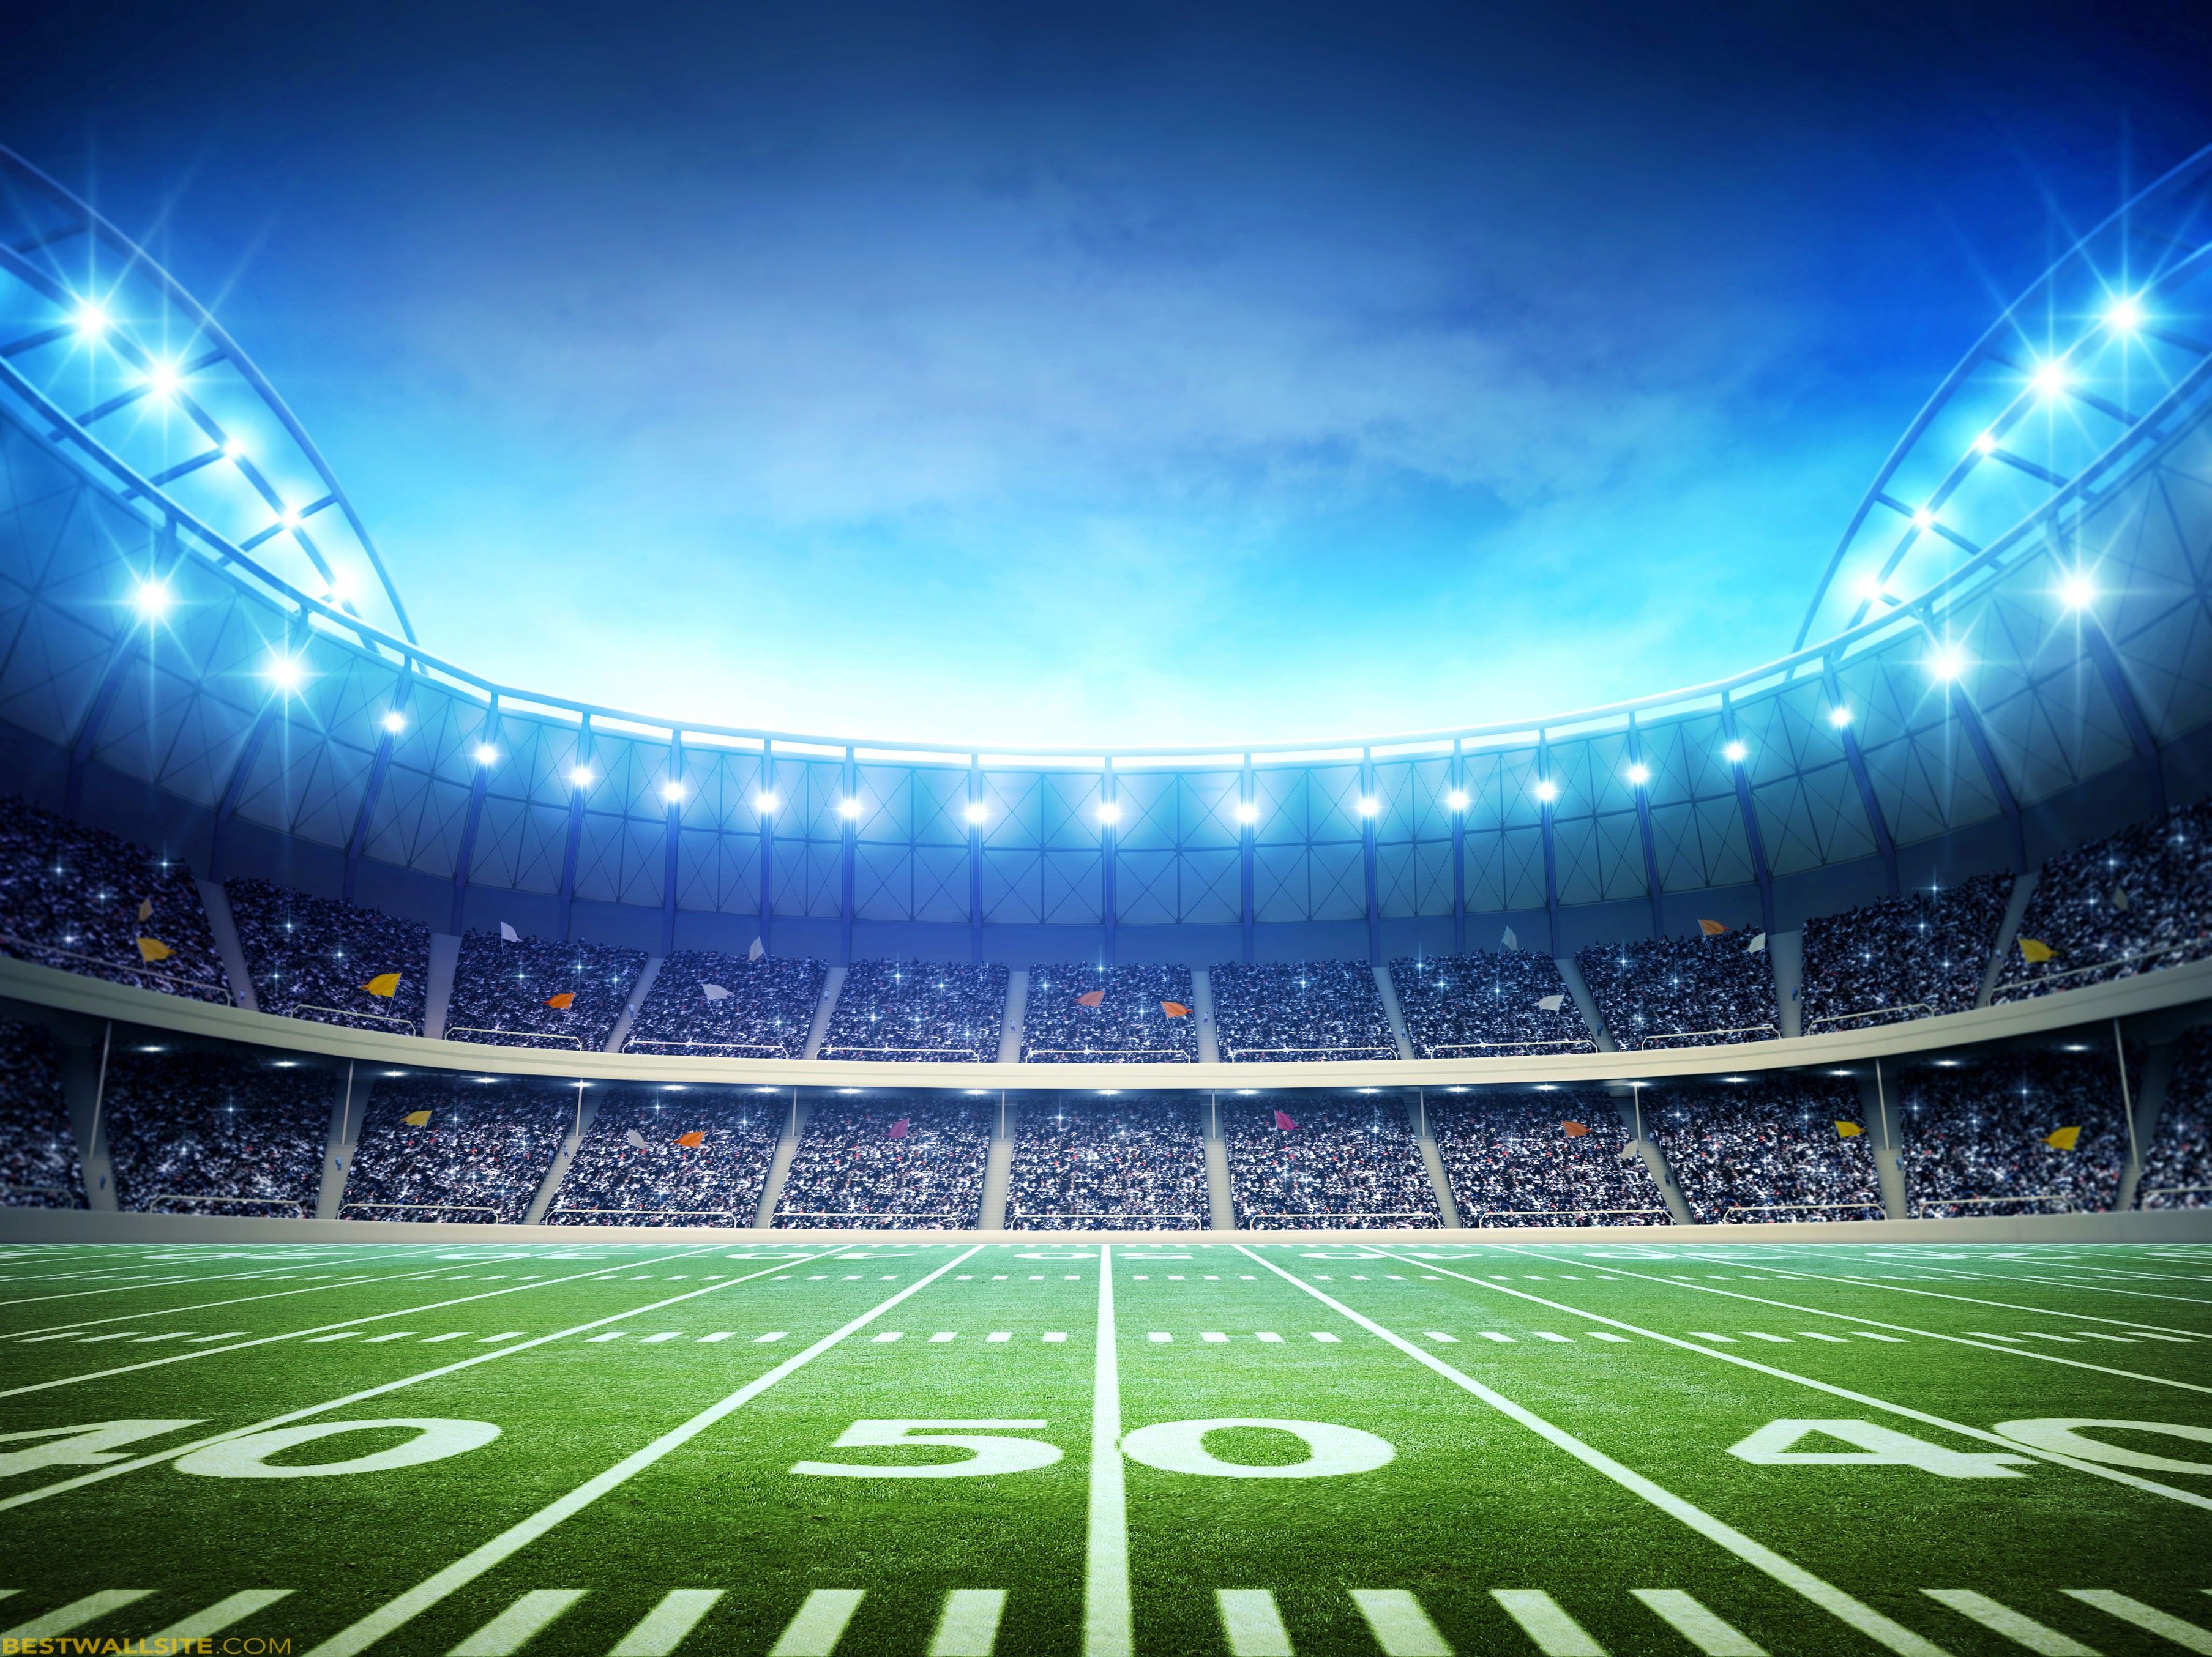 Football Field Wallpaper High Quality For Mobile